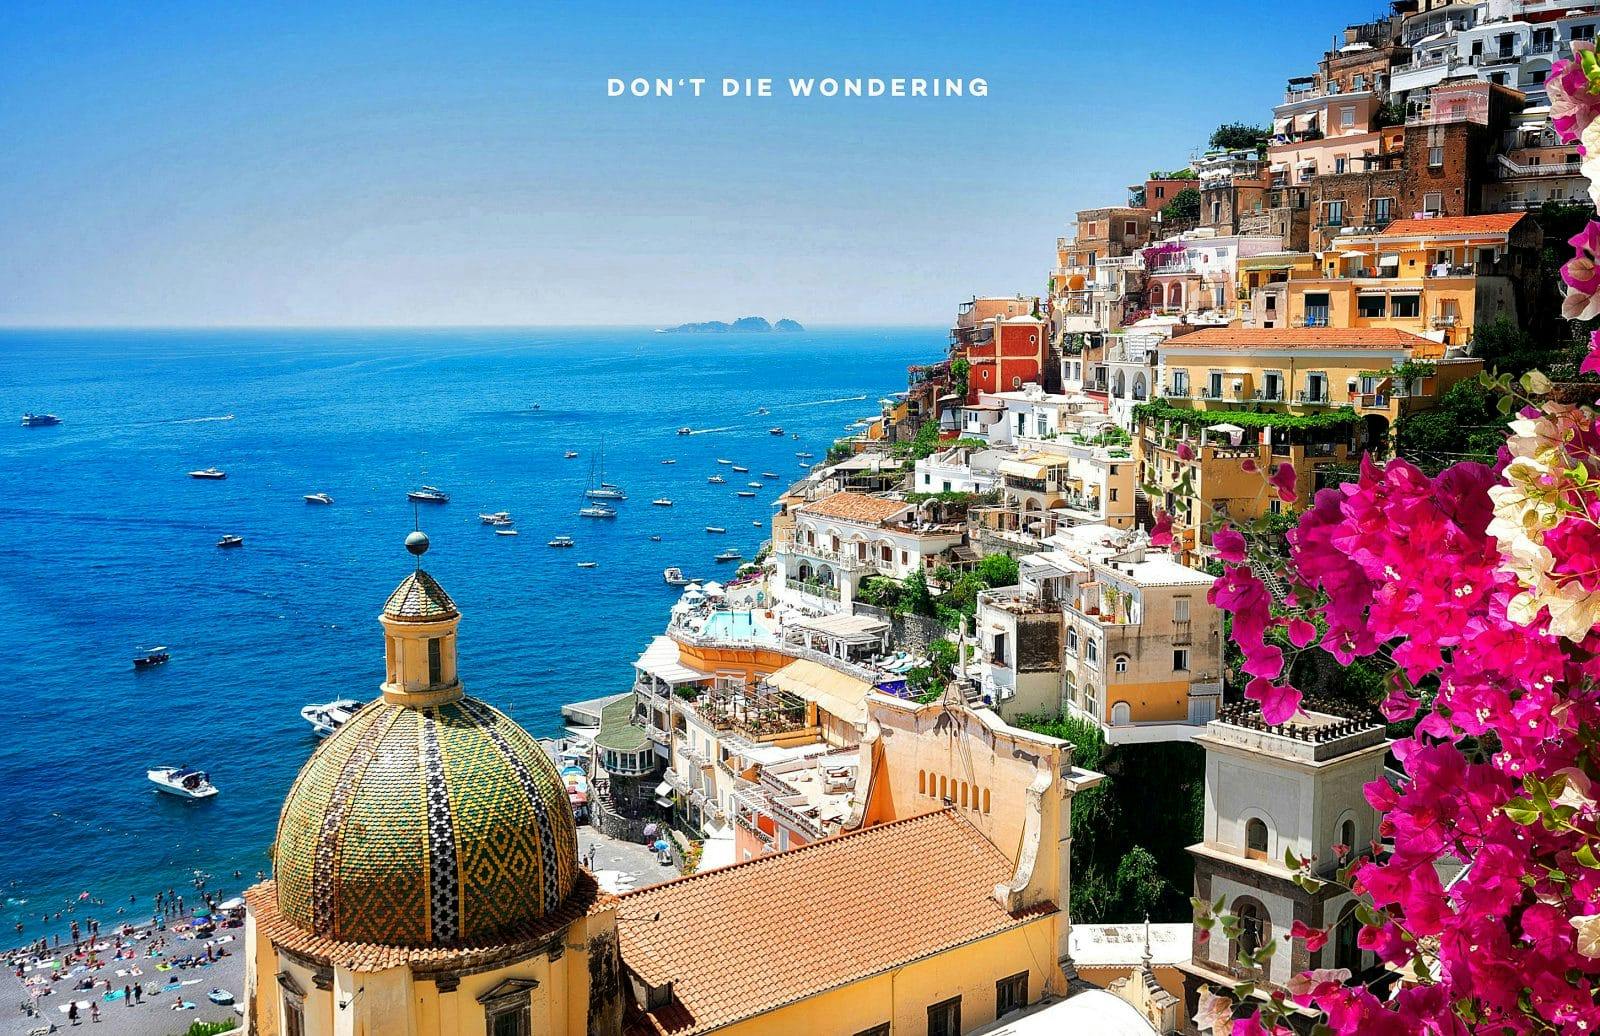 Most Picturesque Towns On Italy’s Amalfi Coast